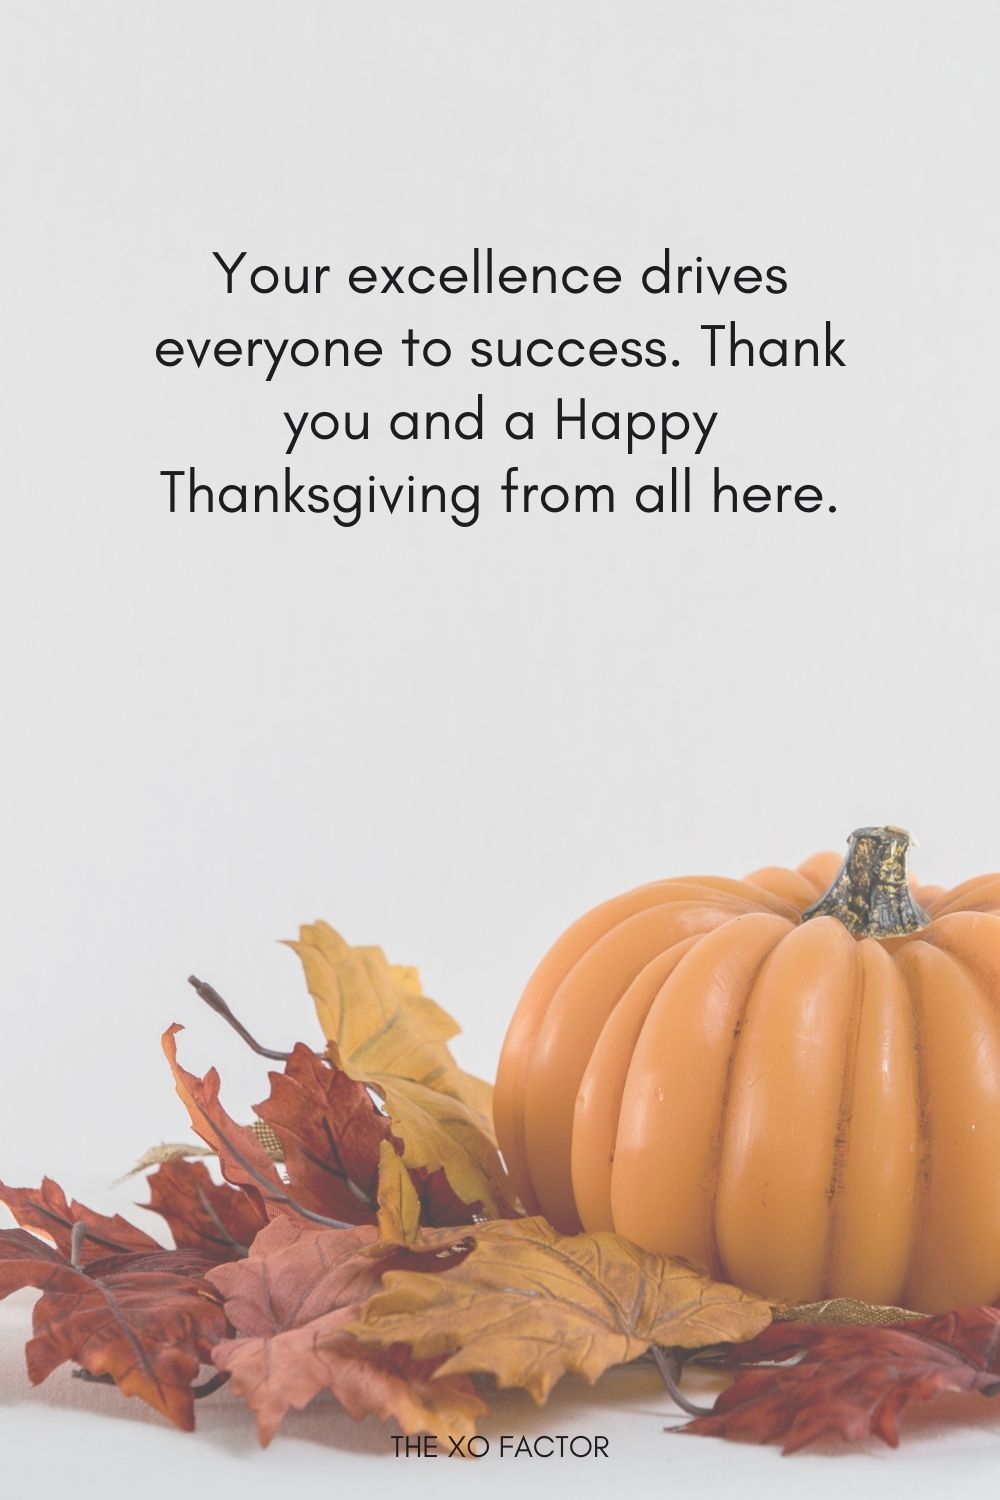 Your excellence drives everyone to success. Thank you and a Happy Thanksgiving from all here.